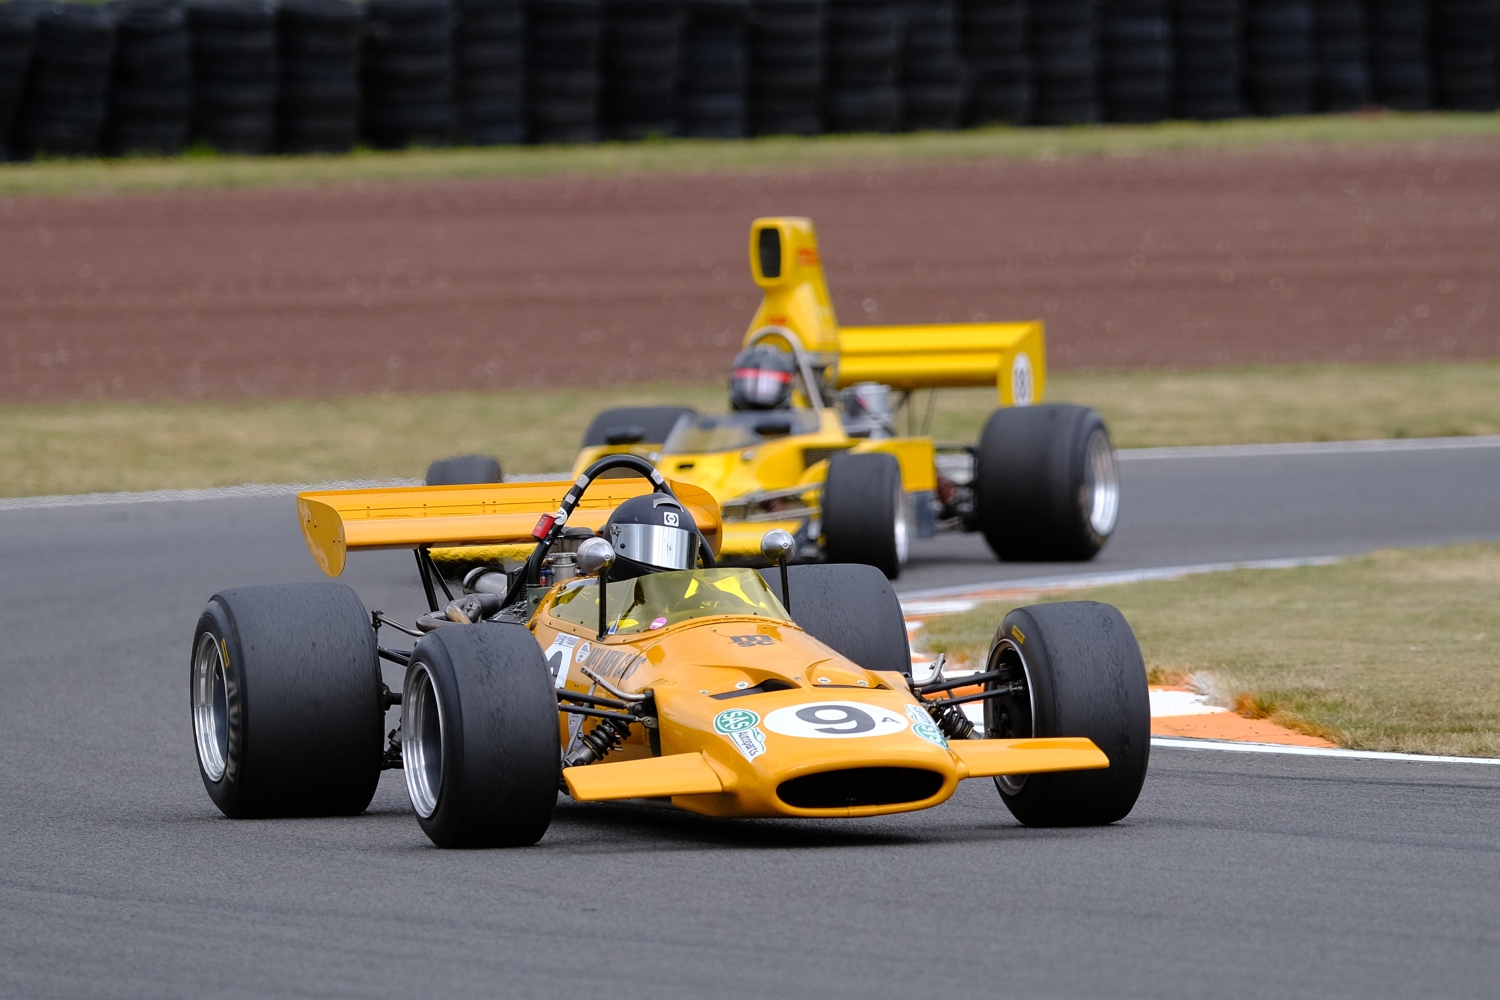 Formula 500 racing set to feature as usual at the Taupo Historic GP